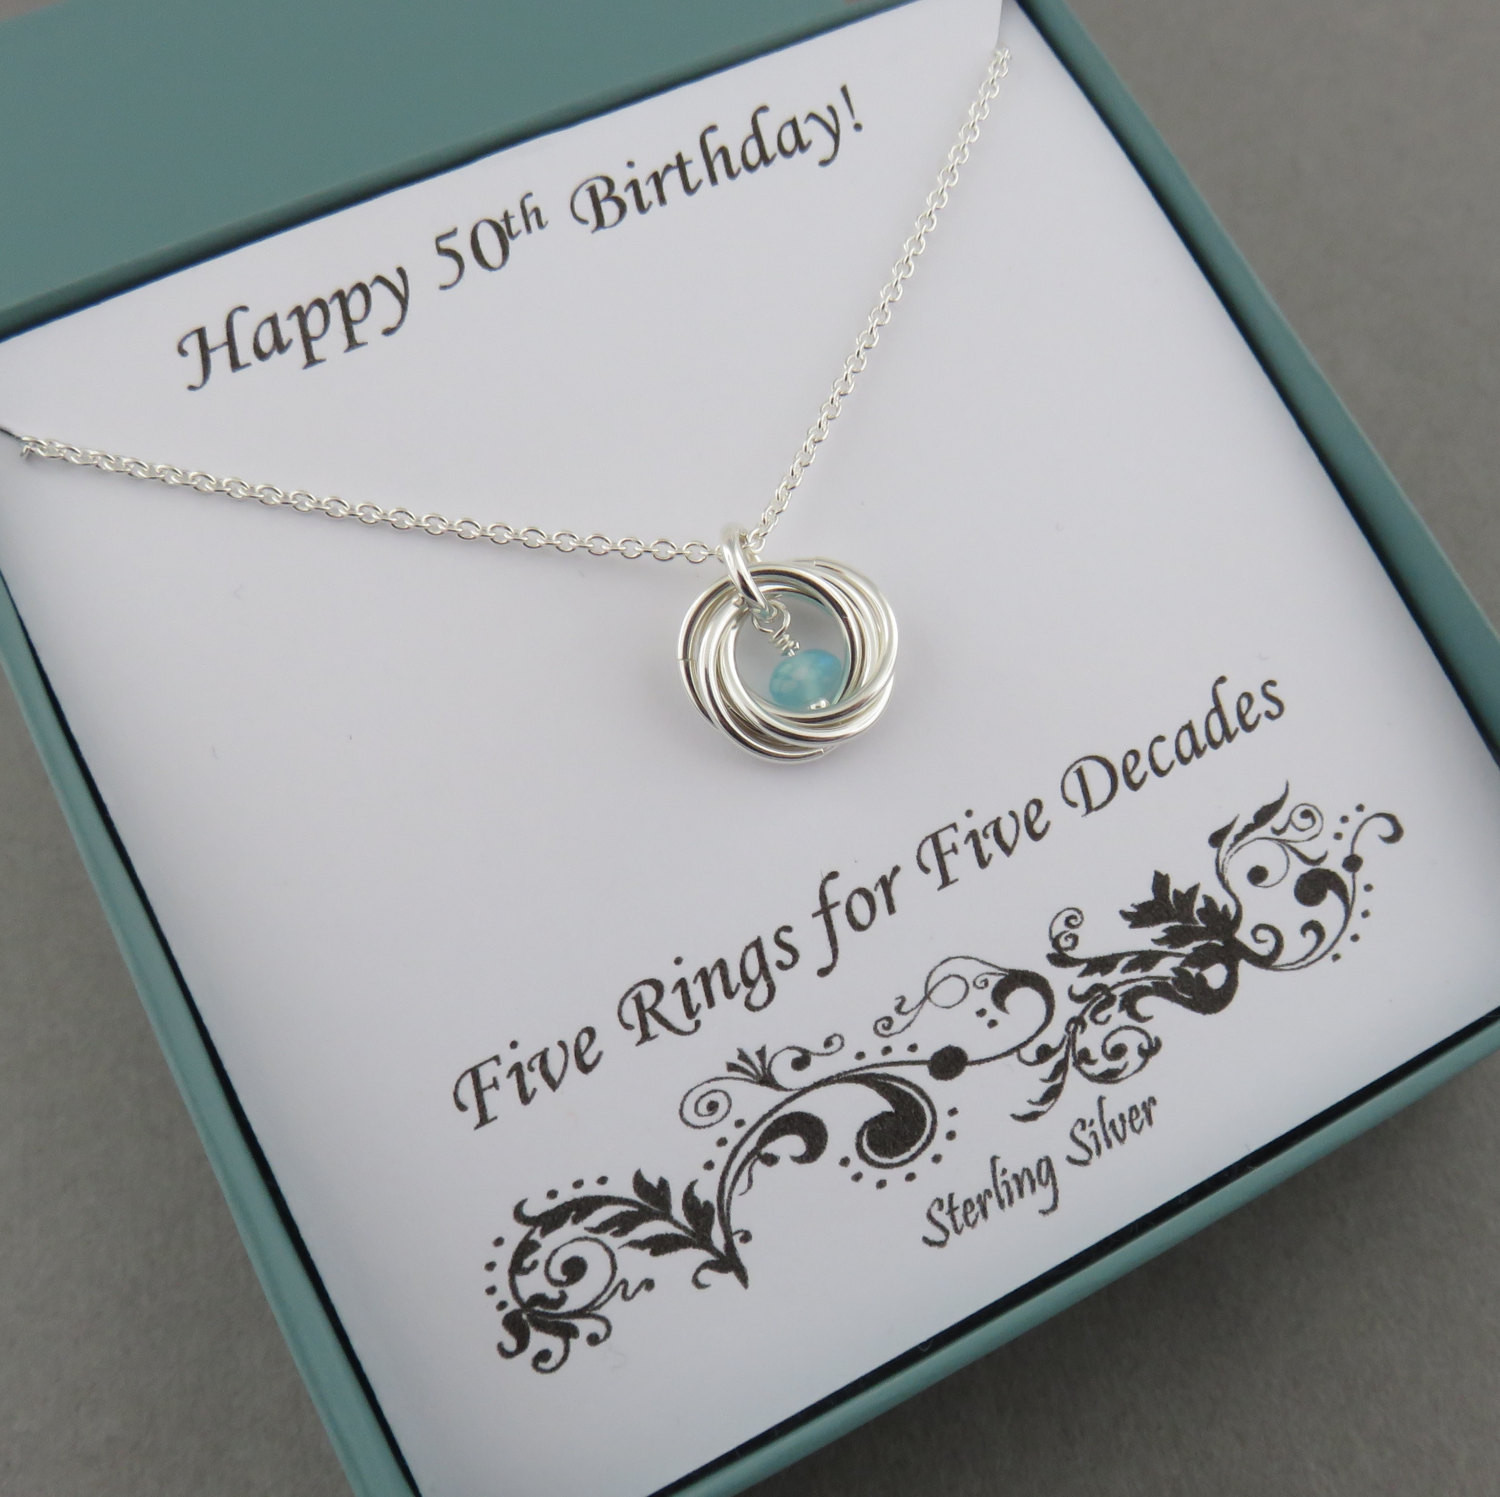 Birthday Gifts For Women
 50th Birthday Gift for Women Birthstone Necklace Sterling